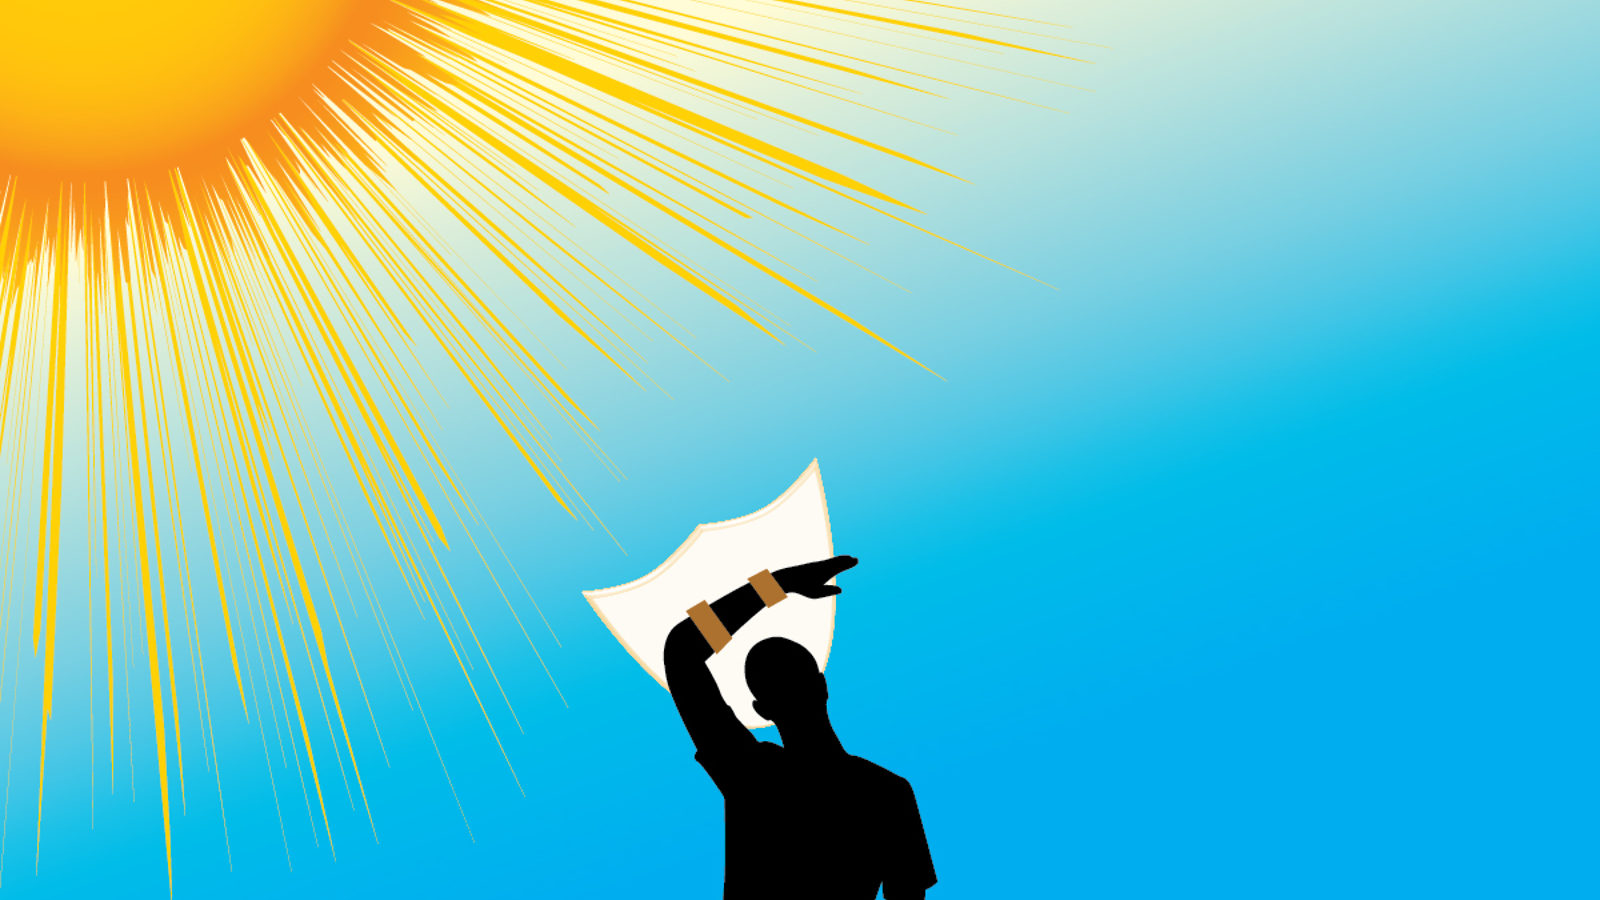 Illustration of person using shield to block sun rays